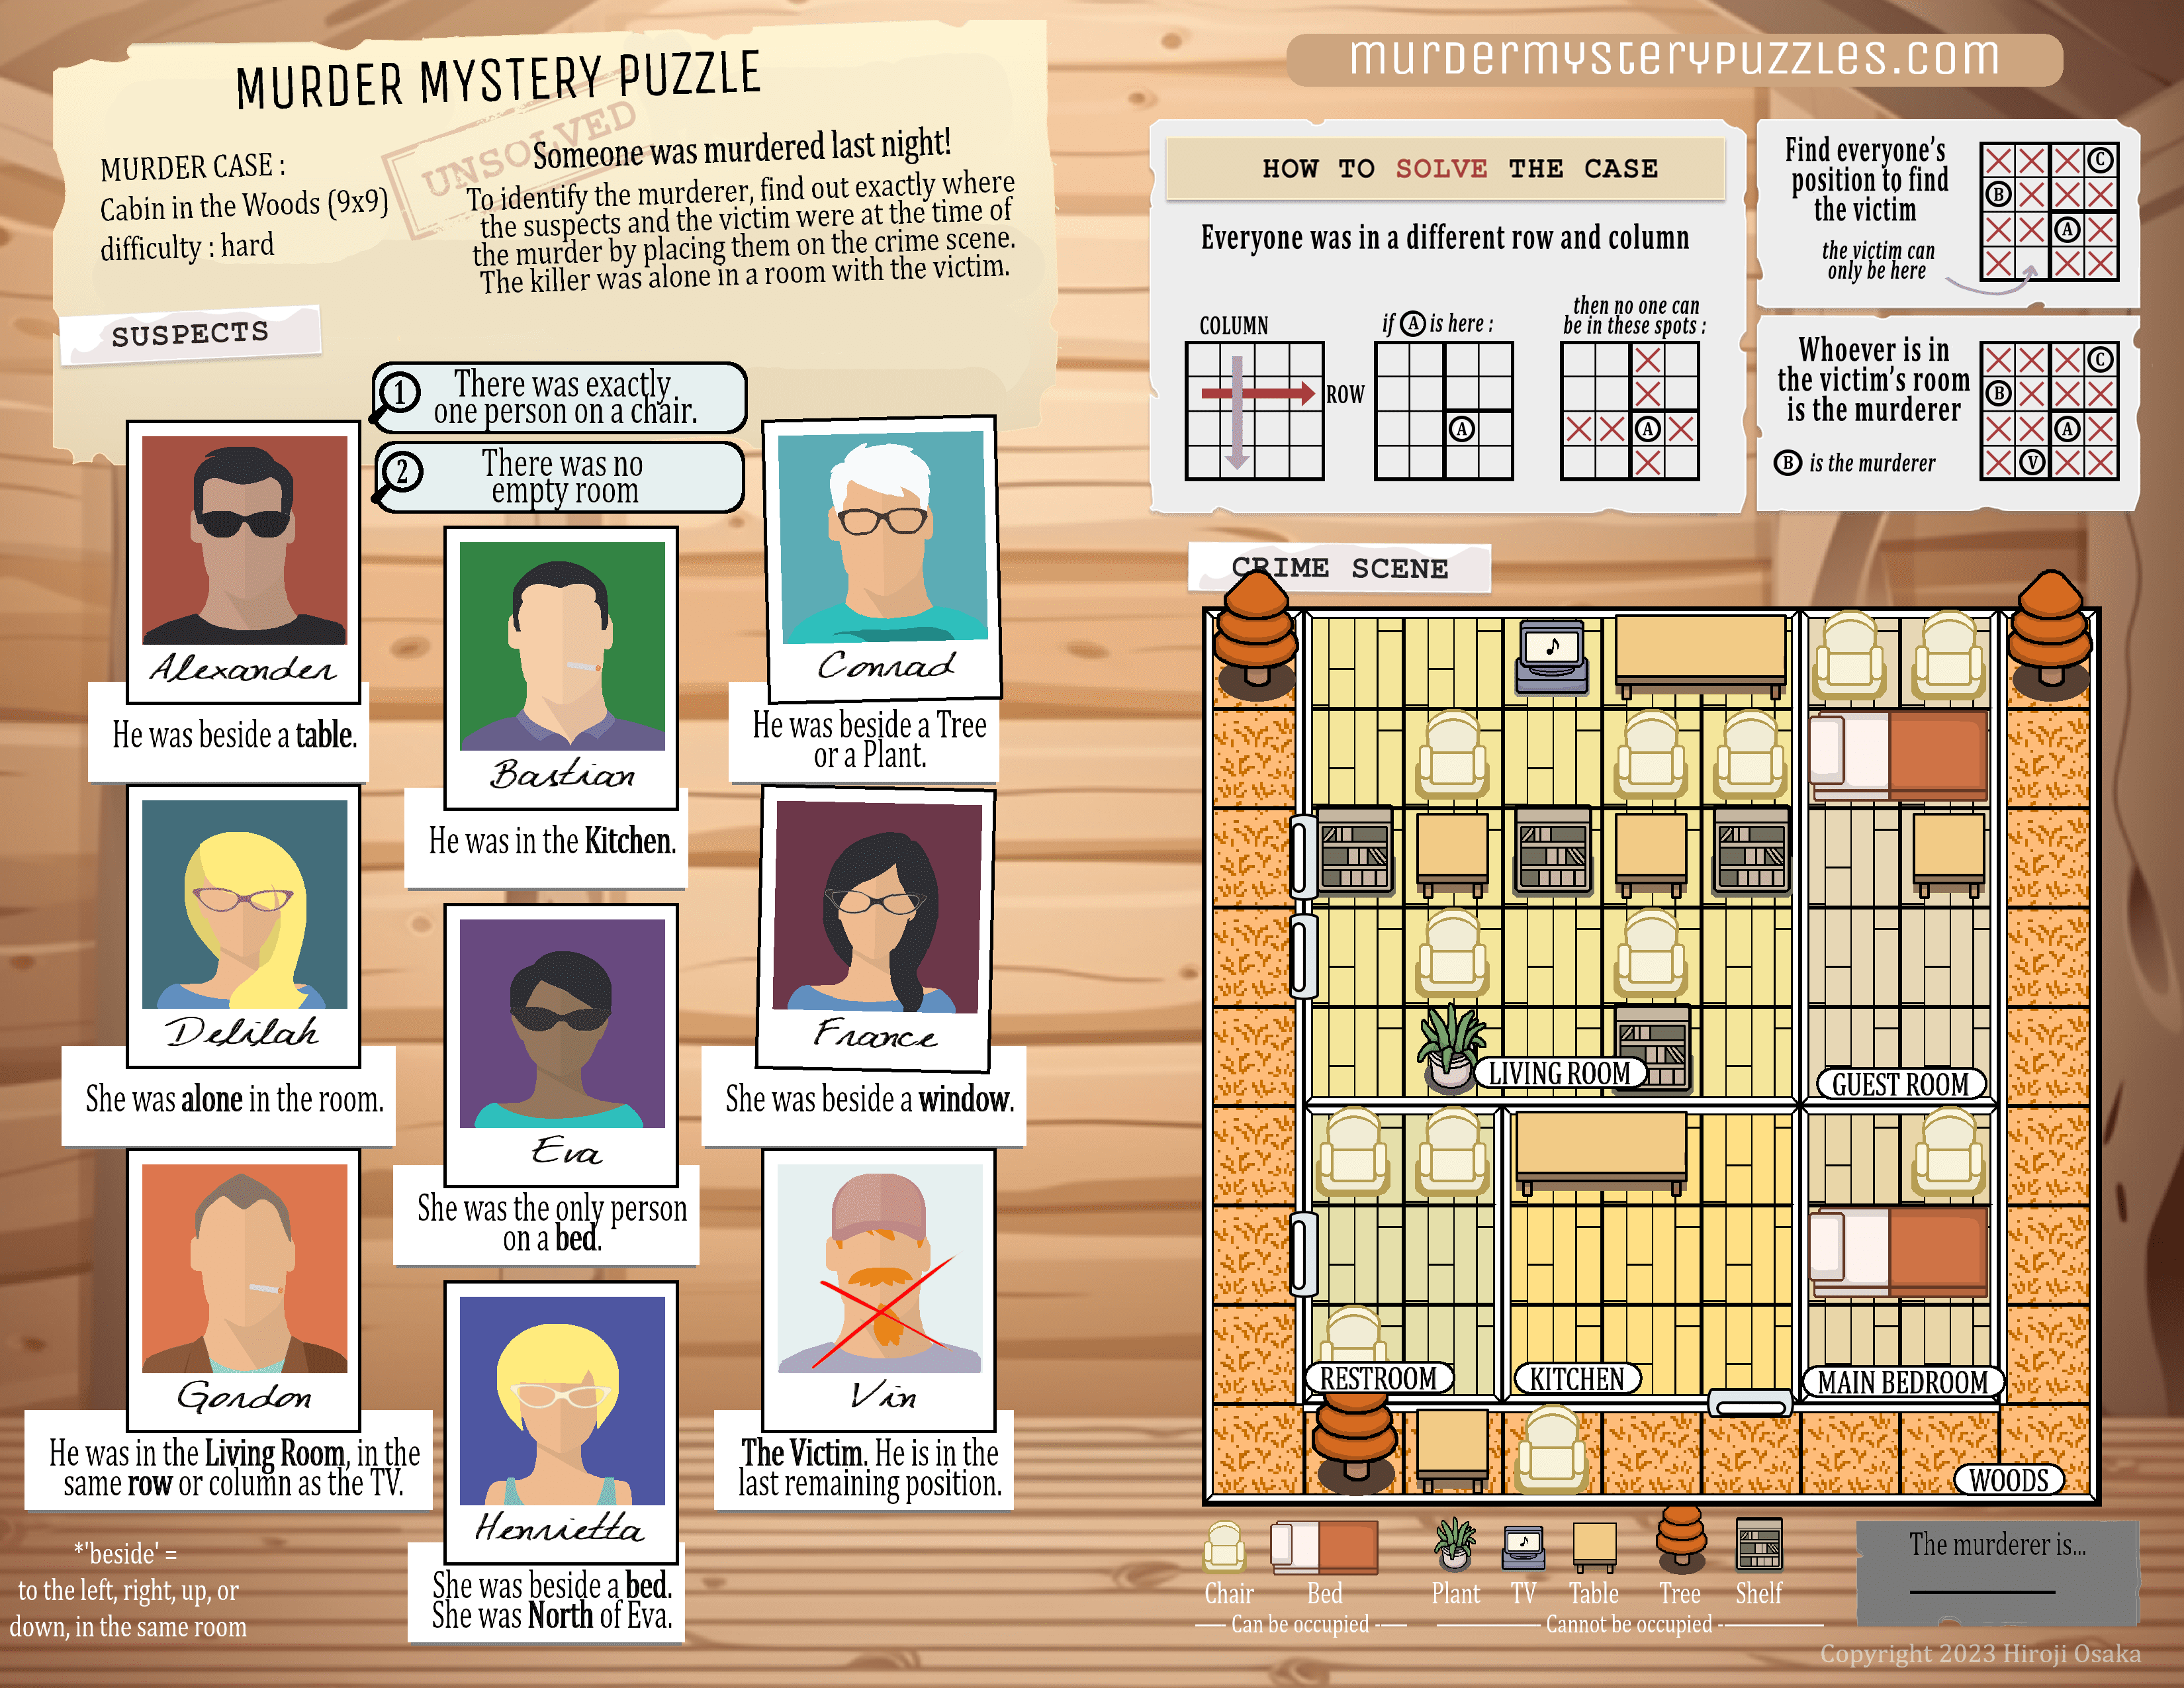 9x9 murder mystery puzzle grid, cabin in the woods theme